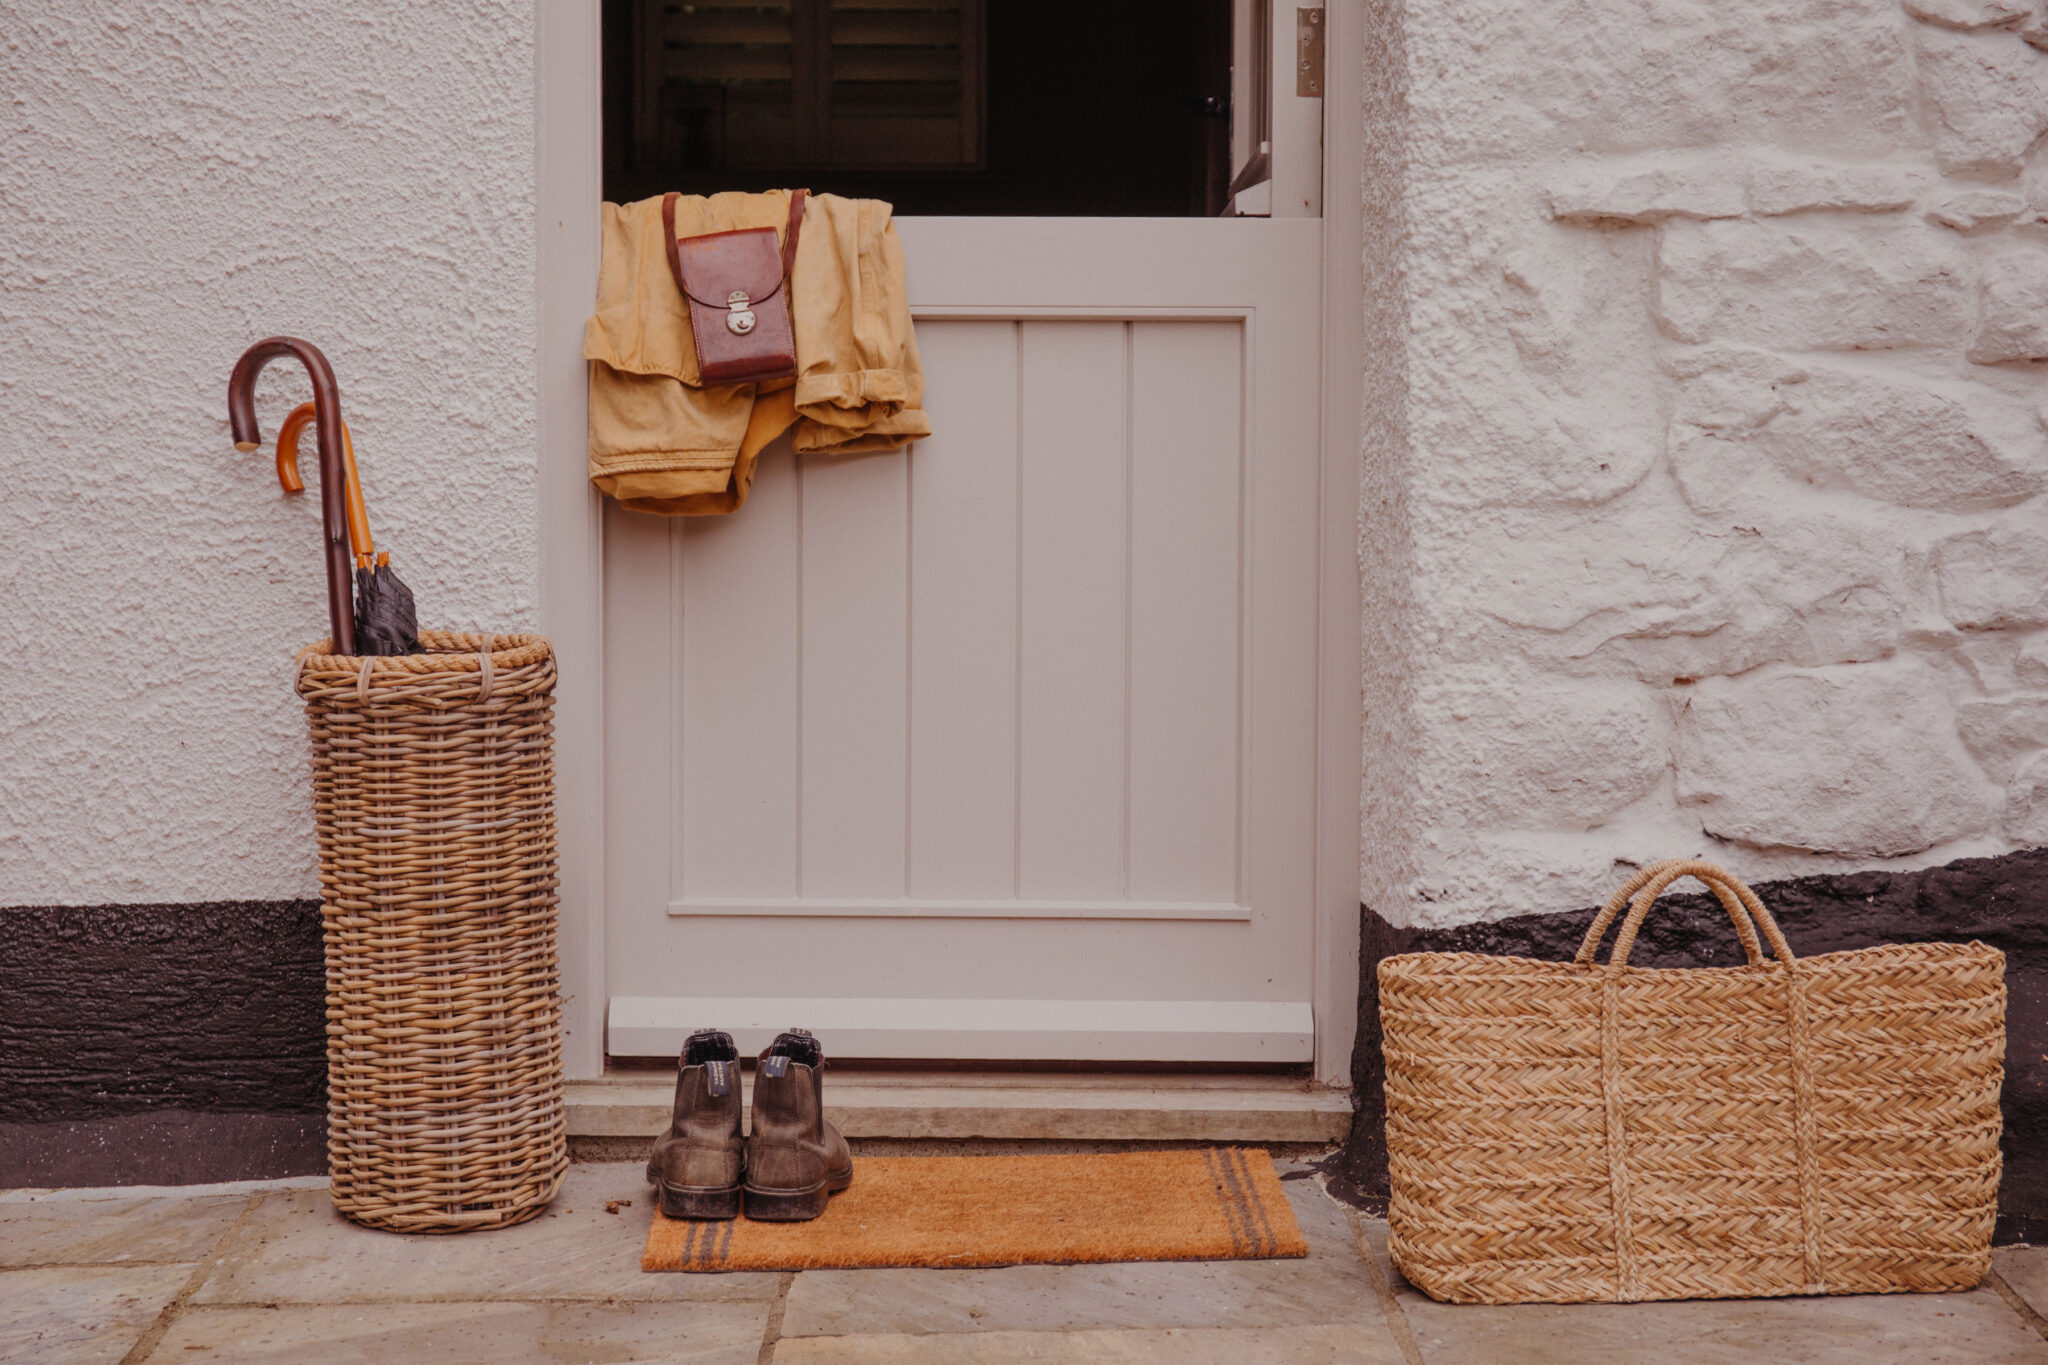 Coats, boots and a basket by a cottage stable door